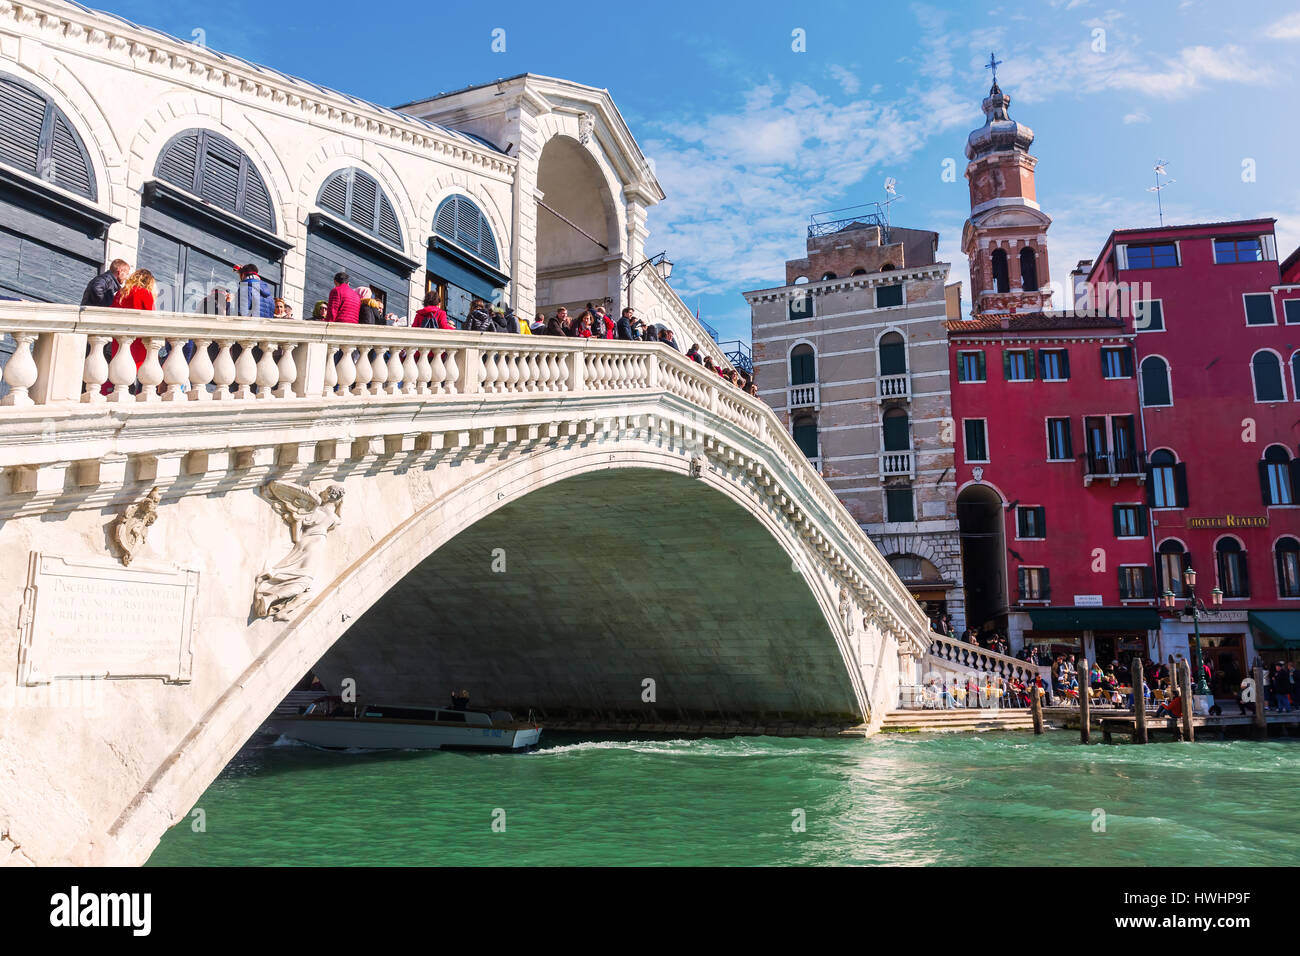 Venice, Italy - February 27, 2017: Rialto Bridge at the Grand Canale with unidentified people. Venice is world renown for the beauty of its settings,  Stock Photo